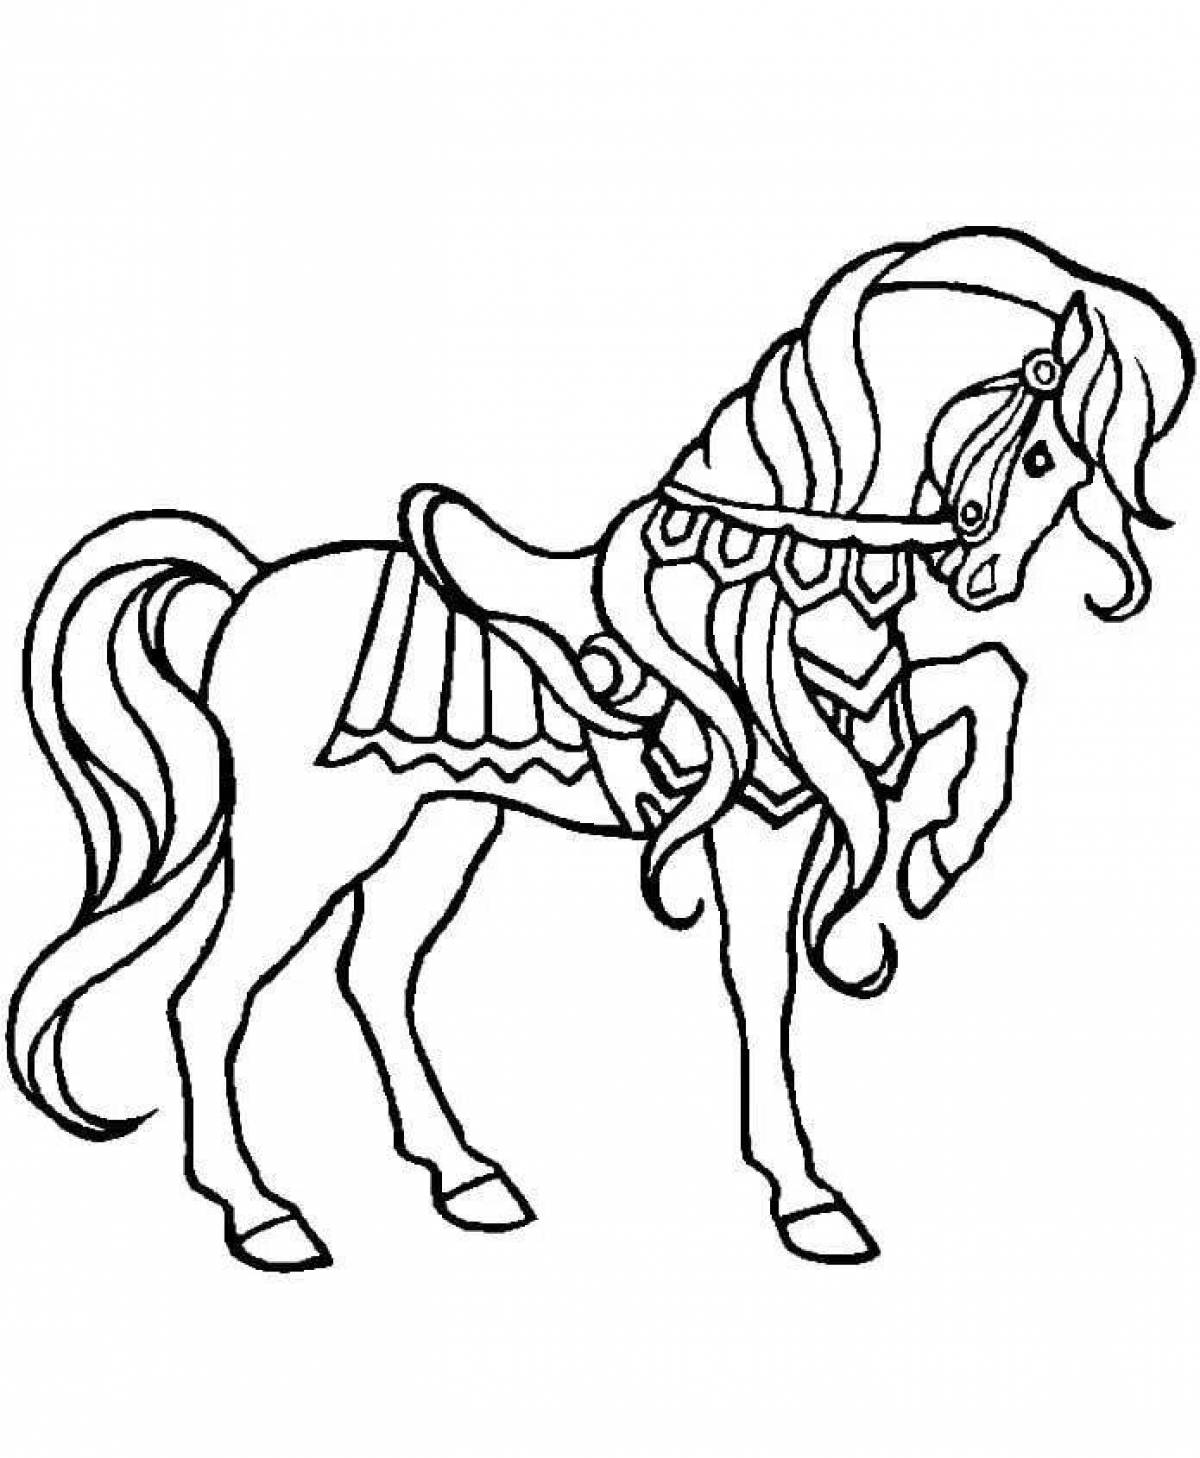 Canturke coloring page